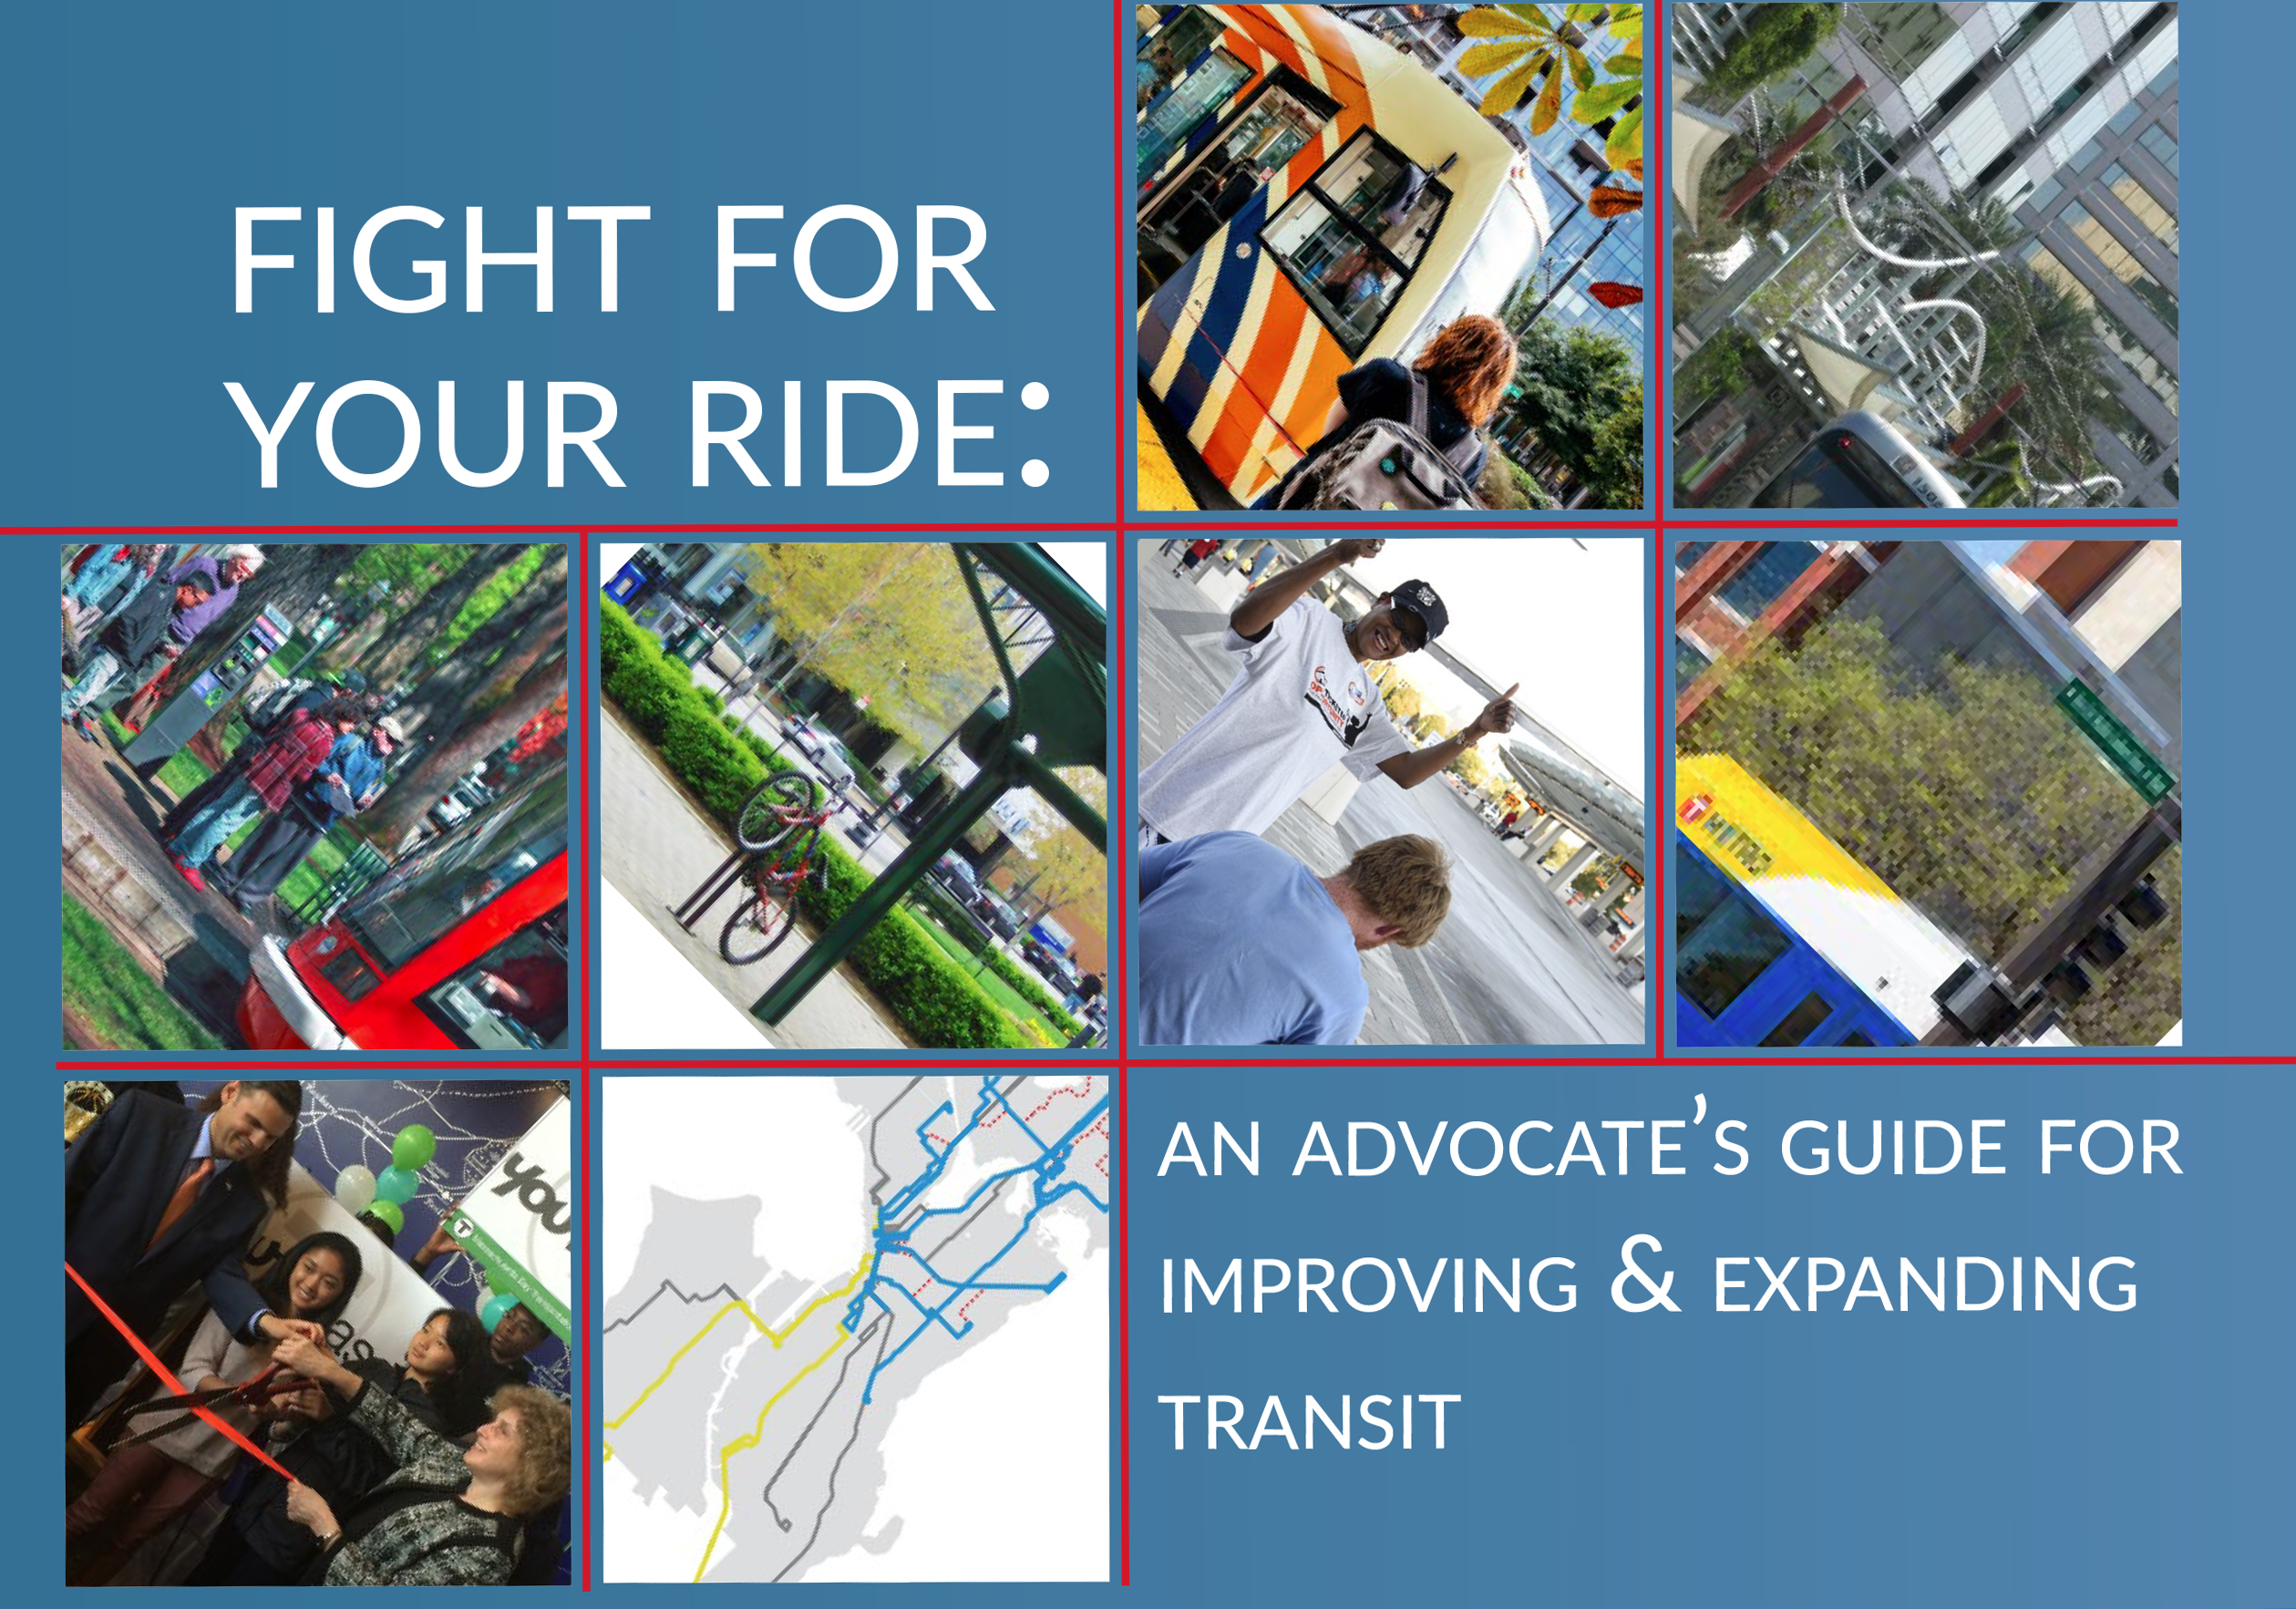 Fight for your ride: An advocate’s guide for expanding and improving transit